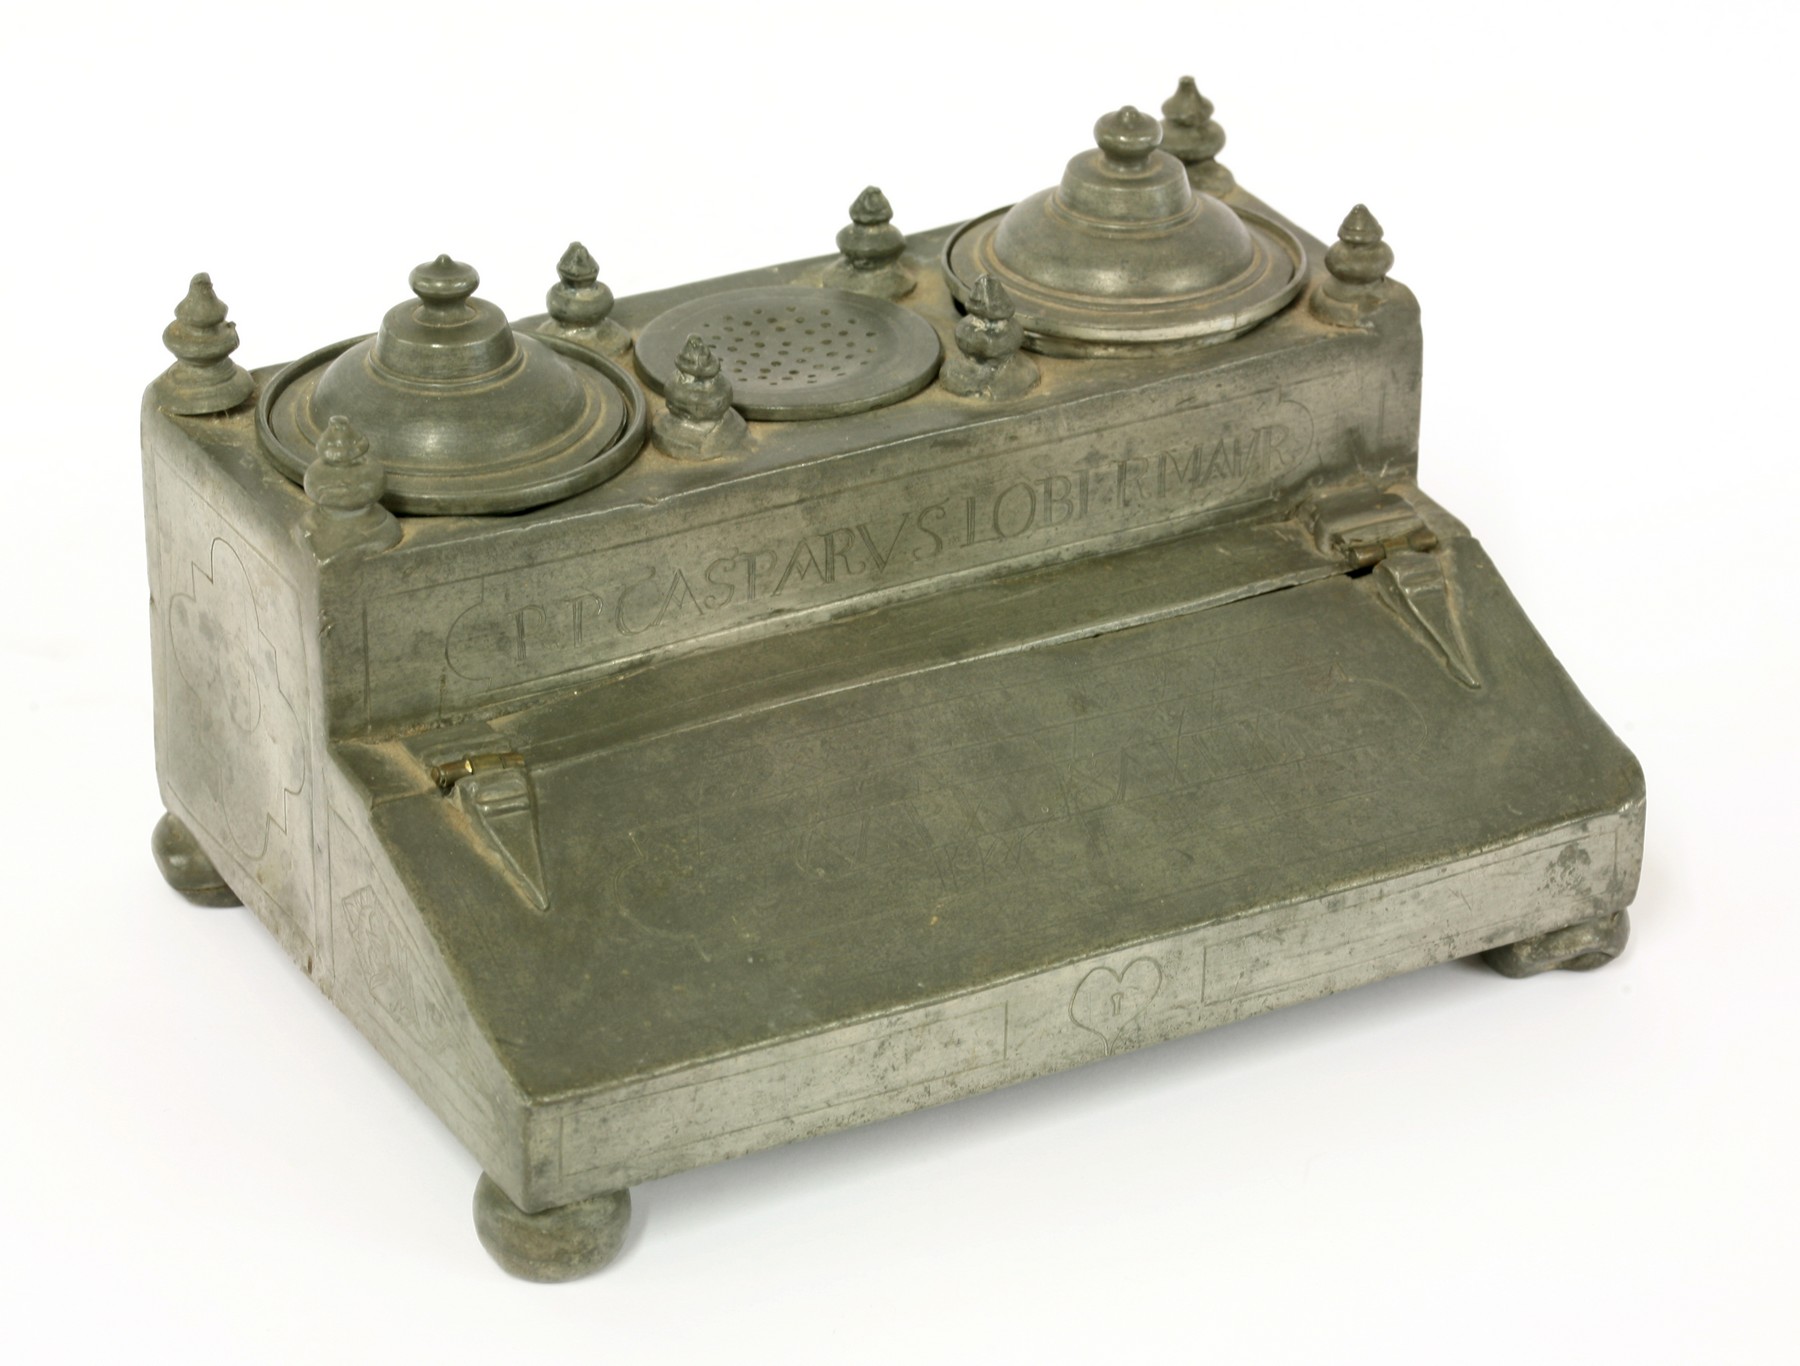 A Continental pewter desk stand,
dated 1723, of usual form with two inkwells flanking a pounce